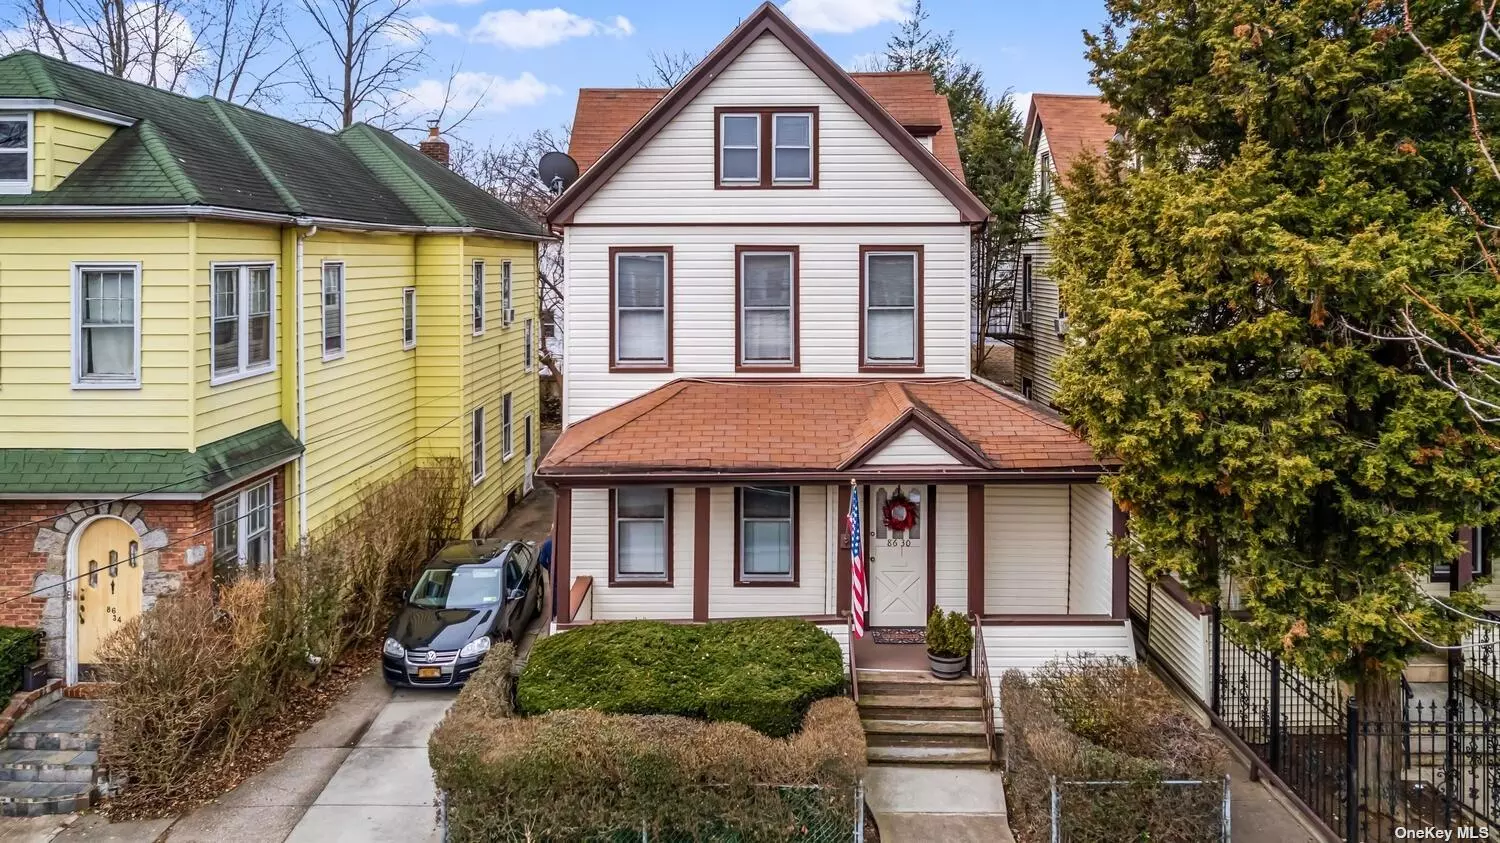 Come See This Well Maintained 3 Family Home In The Heart Of Woodhaven! This Home Has 3 Seperate Apartments ... 1 Bedroom On The Third Floor, Over 2 Bedrooms, Over 2 Bedrooms ... Shared Driveway ... Basement ... 2 Blocks From Forest Park And 2 Blocks From The Subway ... Call For More Details!